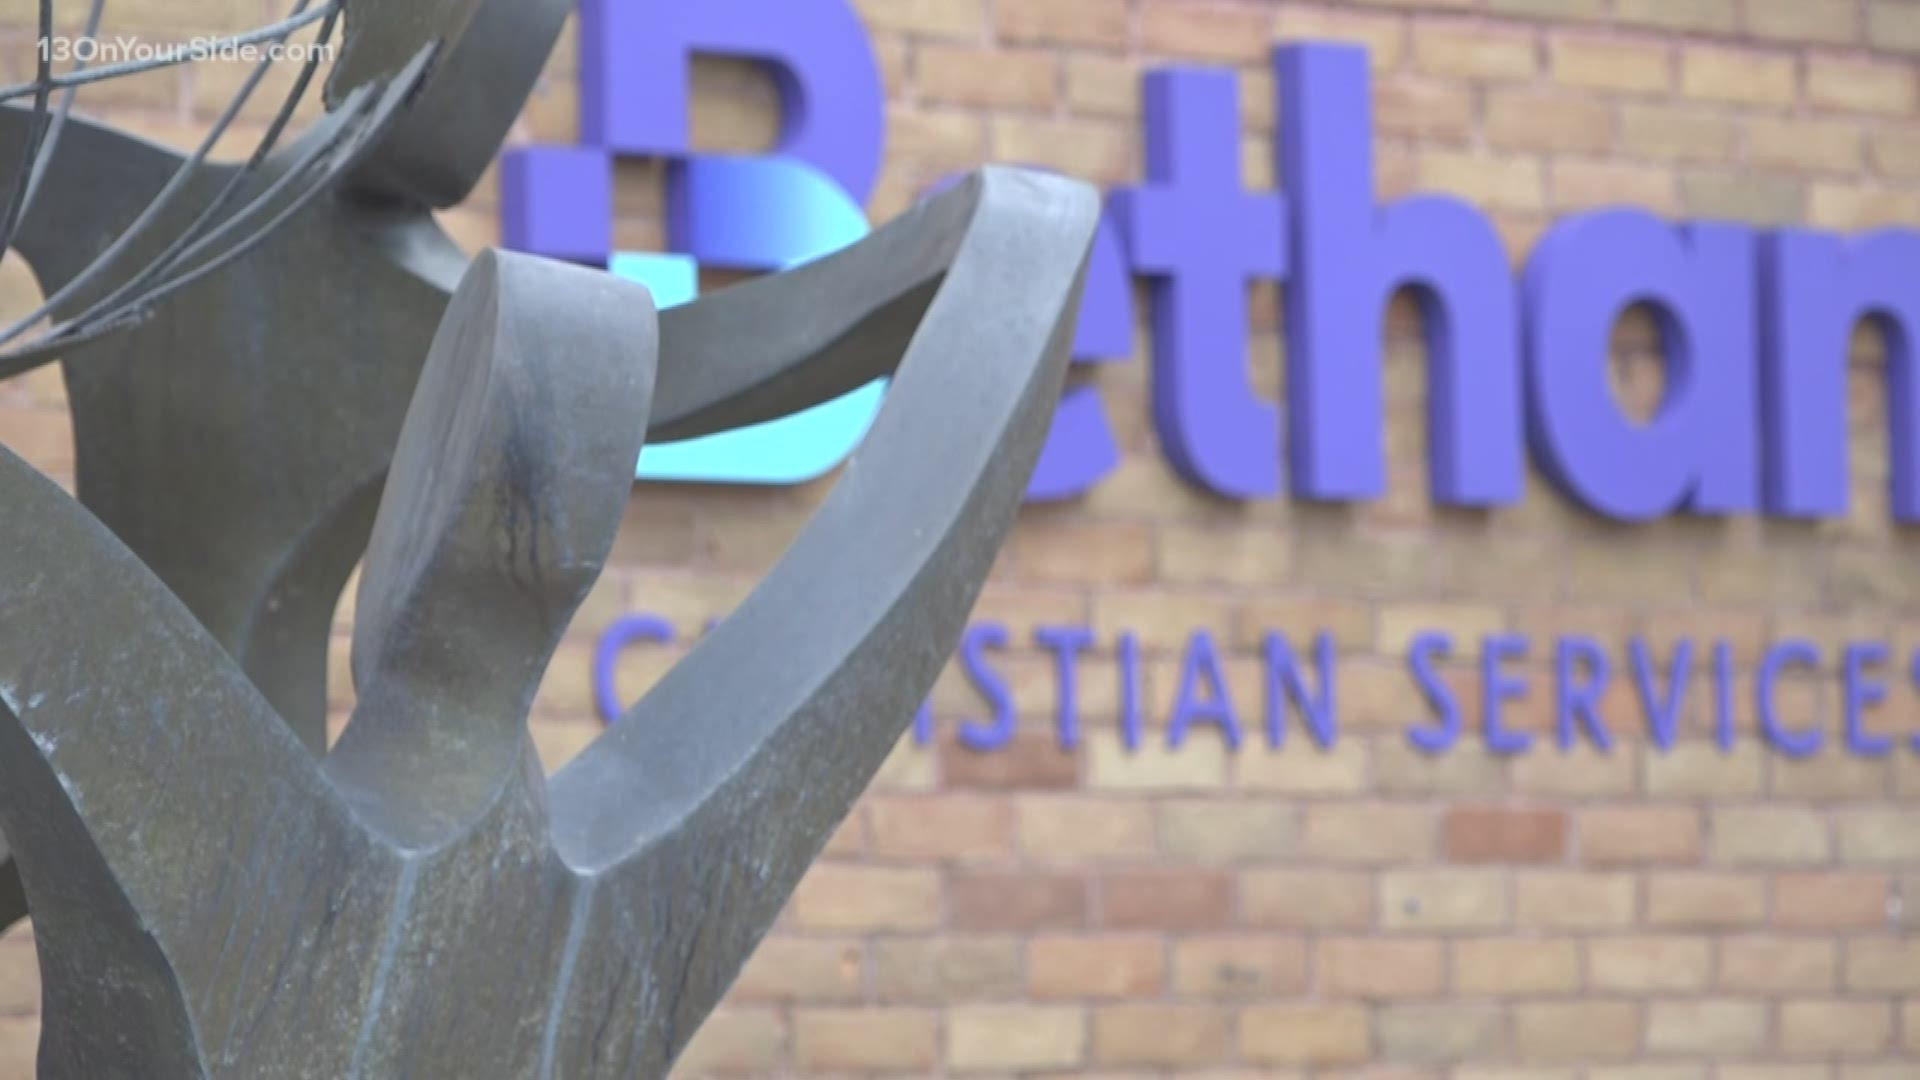 Bethany Christian Services will let their international adoption accreditation expire in 2021.